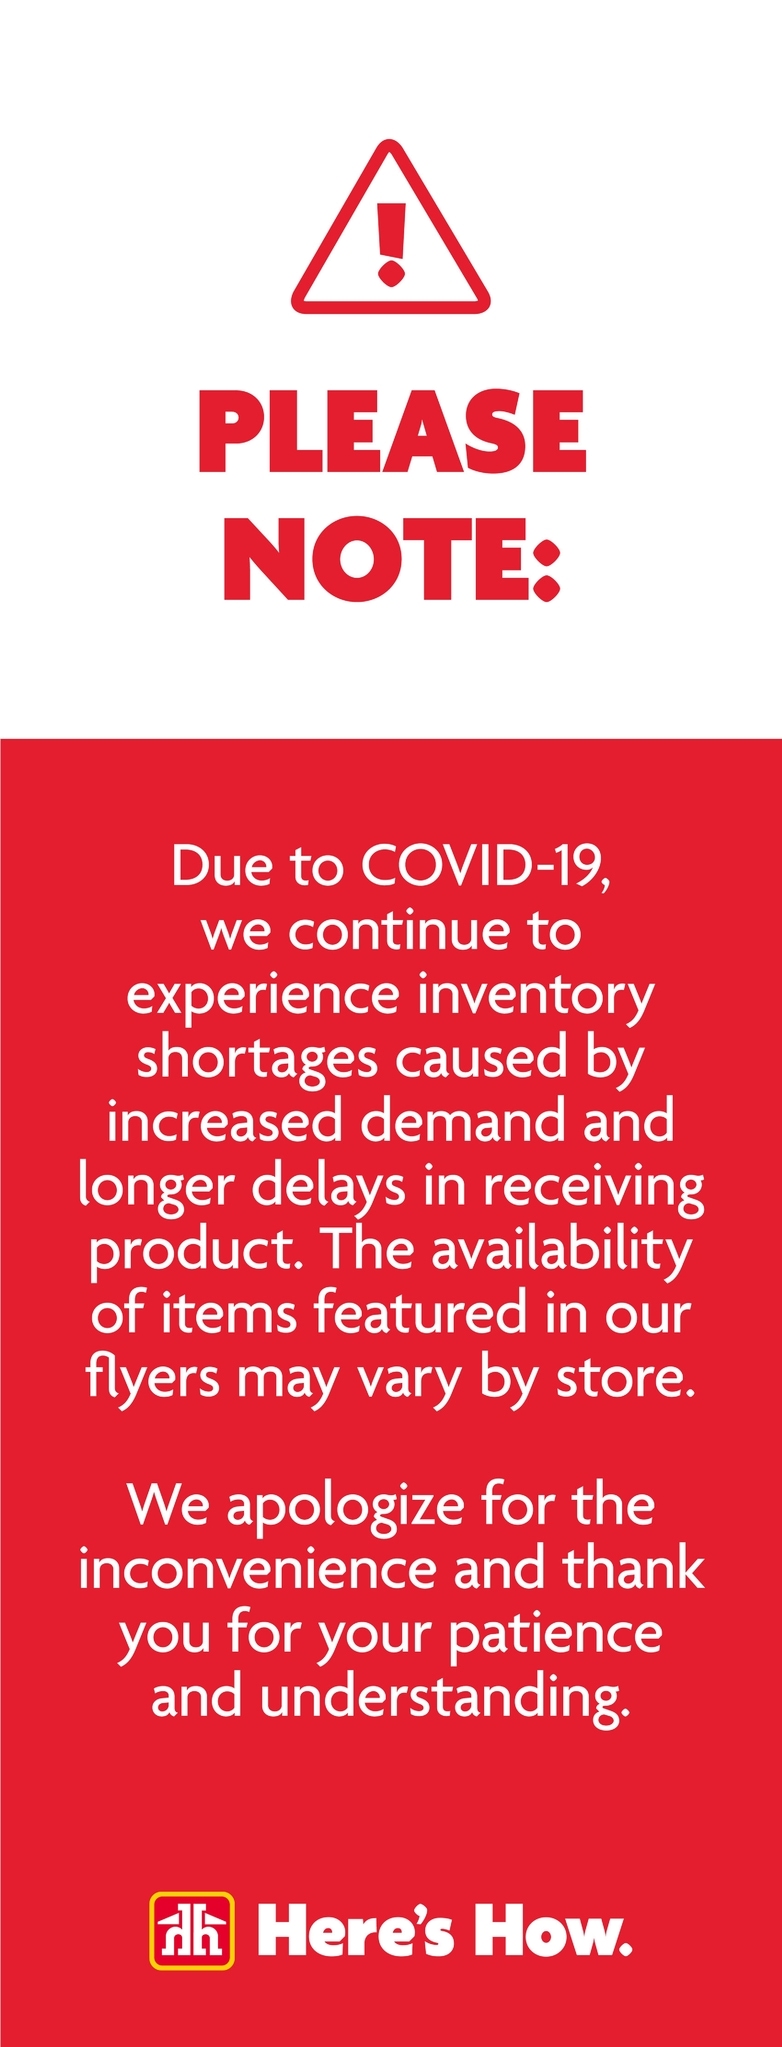 Home Hardware - Building Centre - Page 23